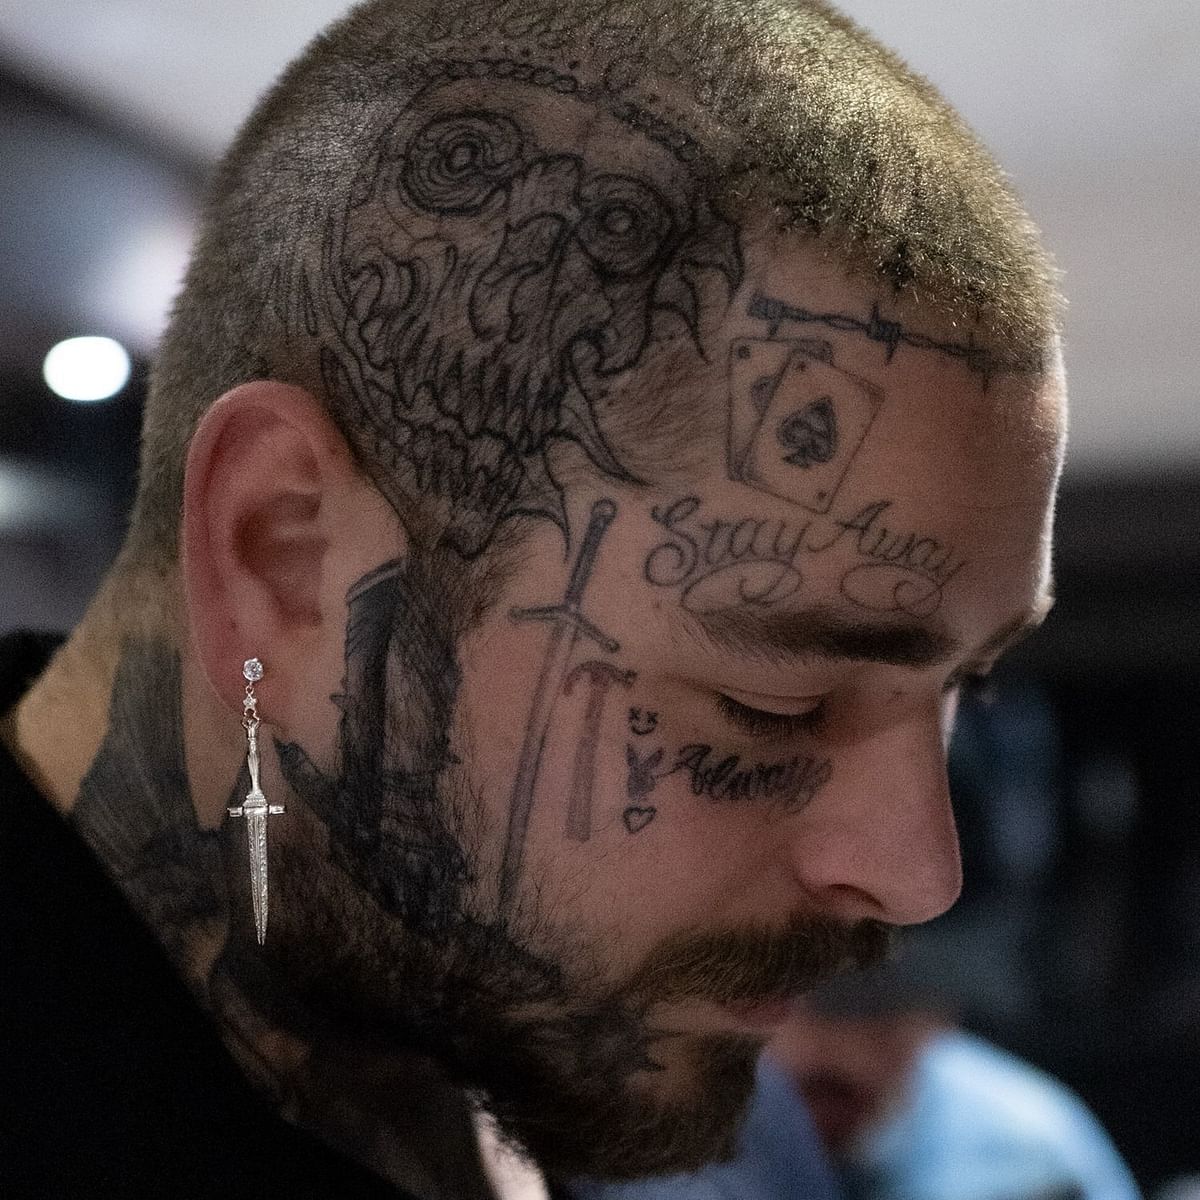 How many tattoos does Post Malone have and what do they mean?